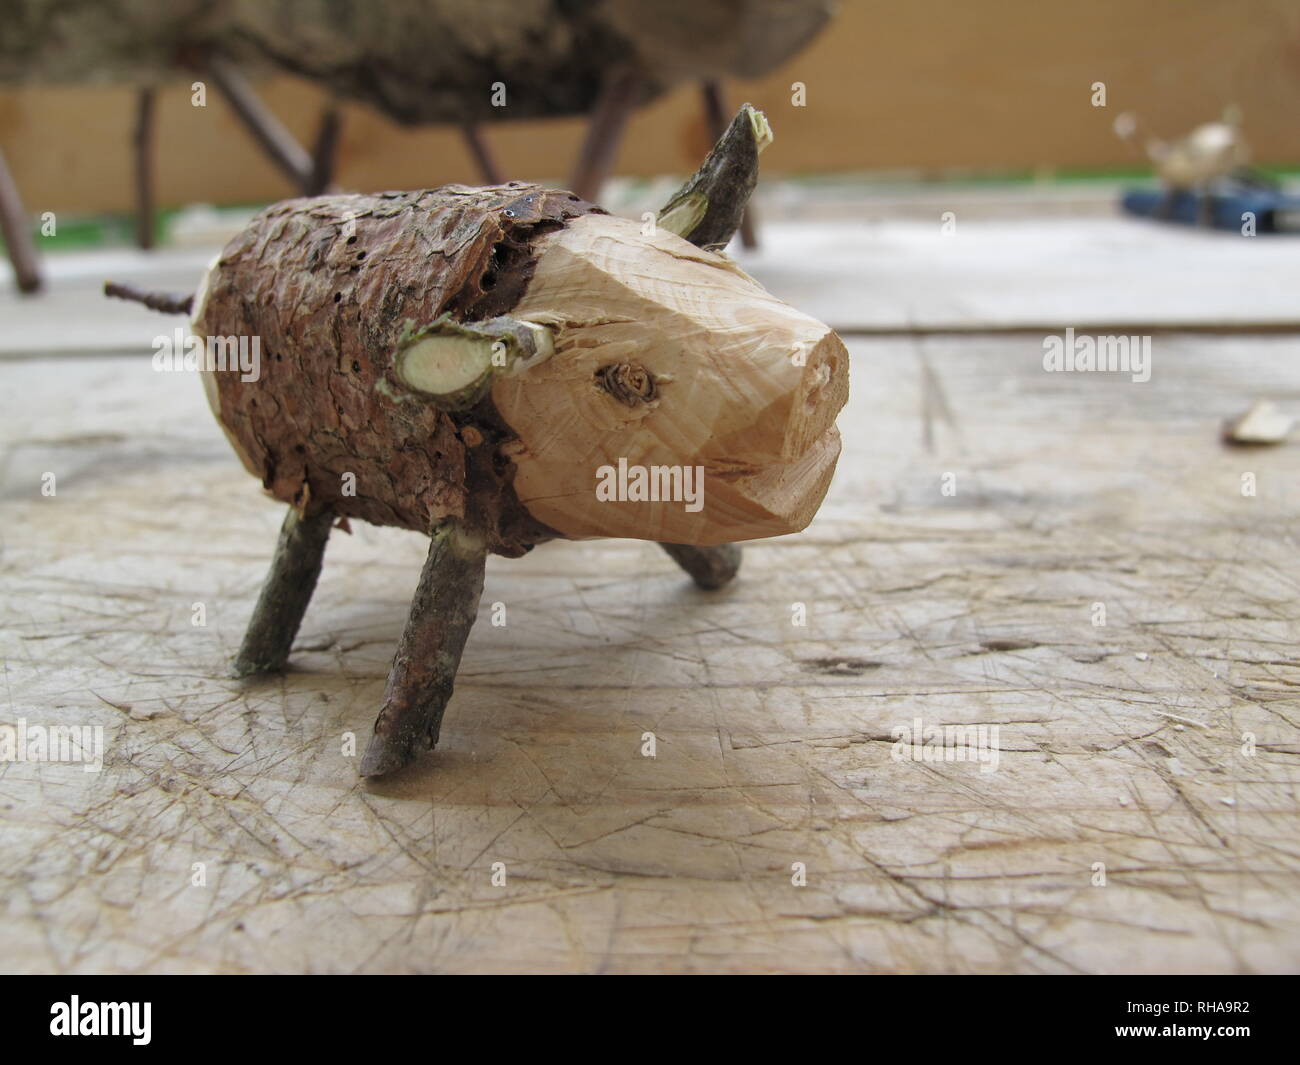 Decorative toy pig. Handcraft project with natural materials without any glue or screws. Stock Photo